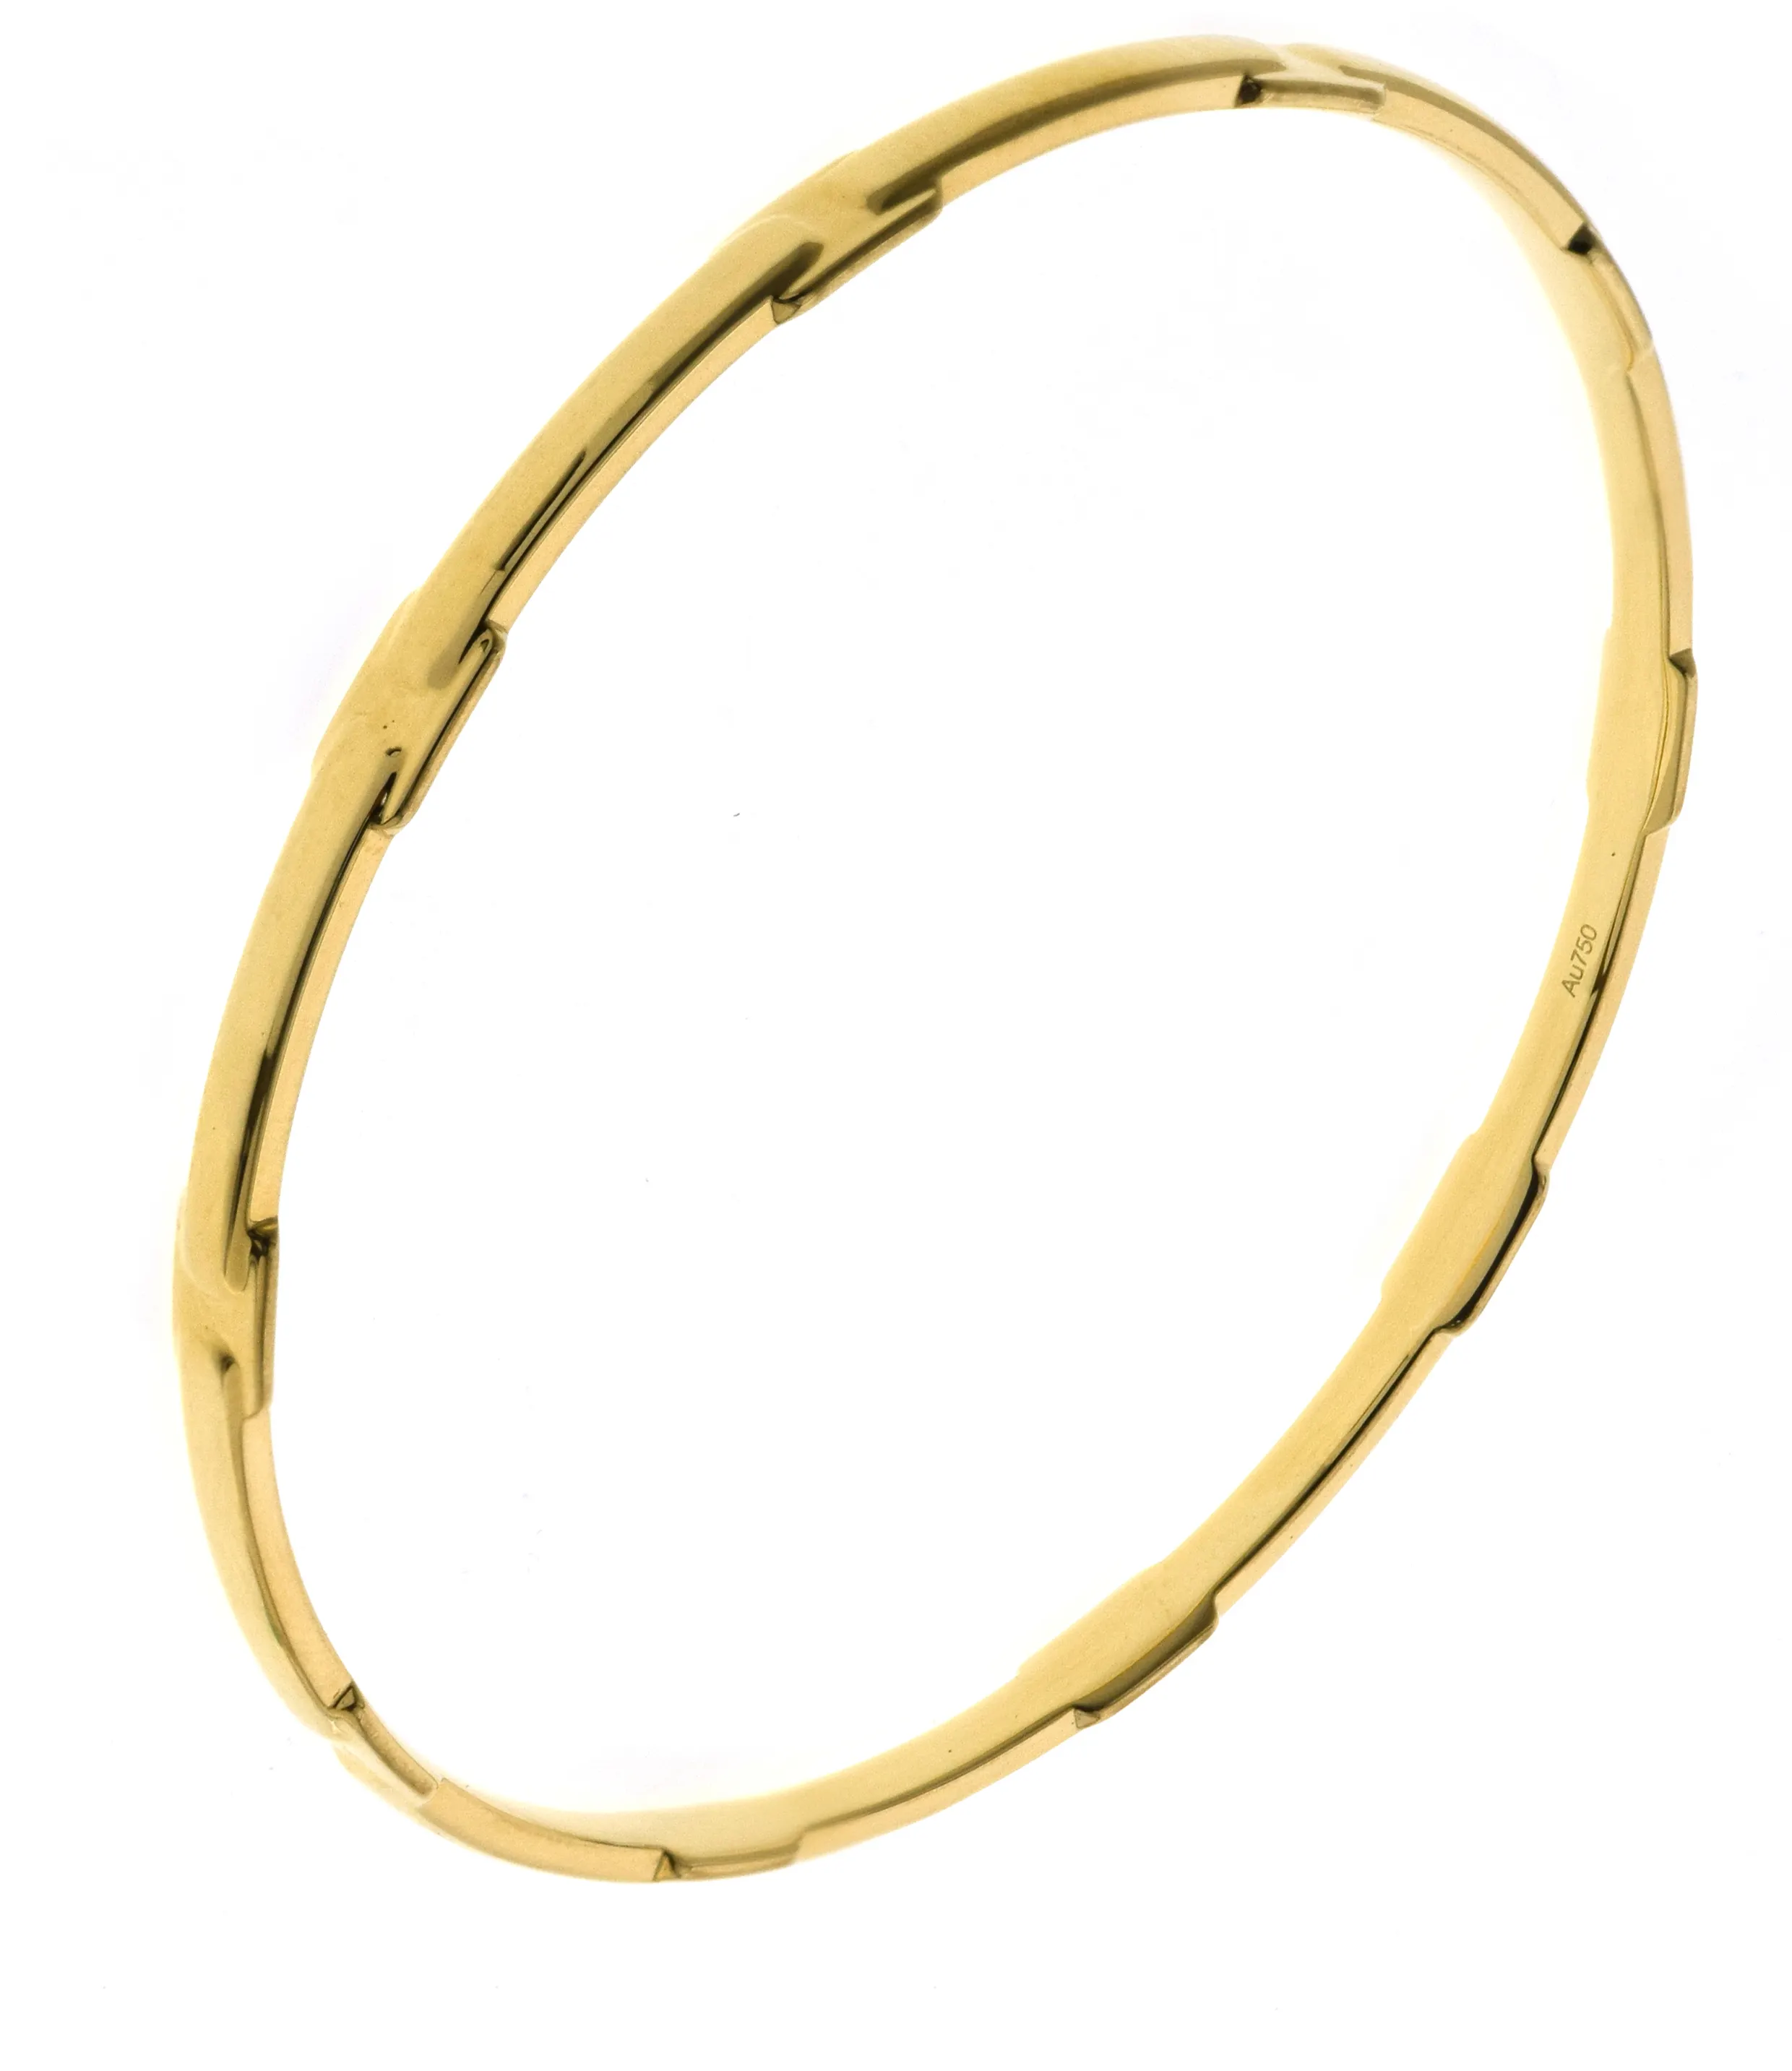 Best Selling Favorable Price 18K Solid Yellow Gold T-Design Luxury Bangles For Women